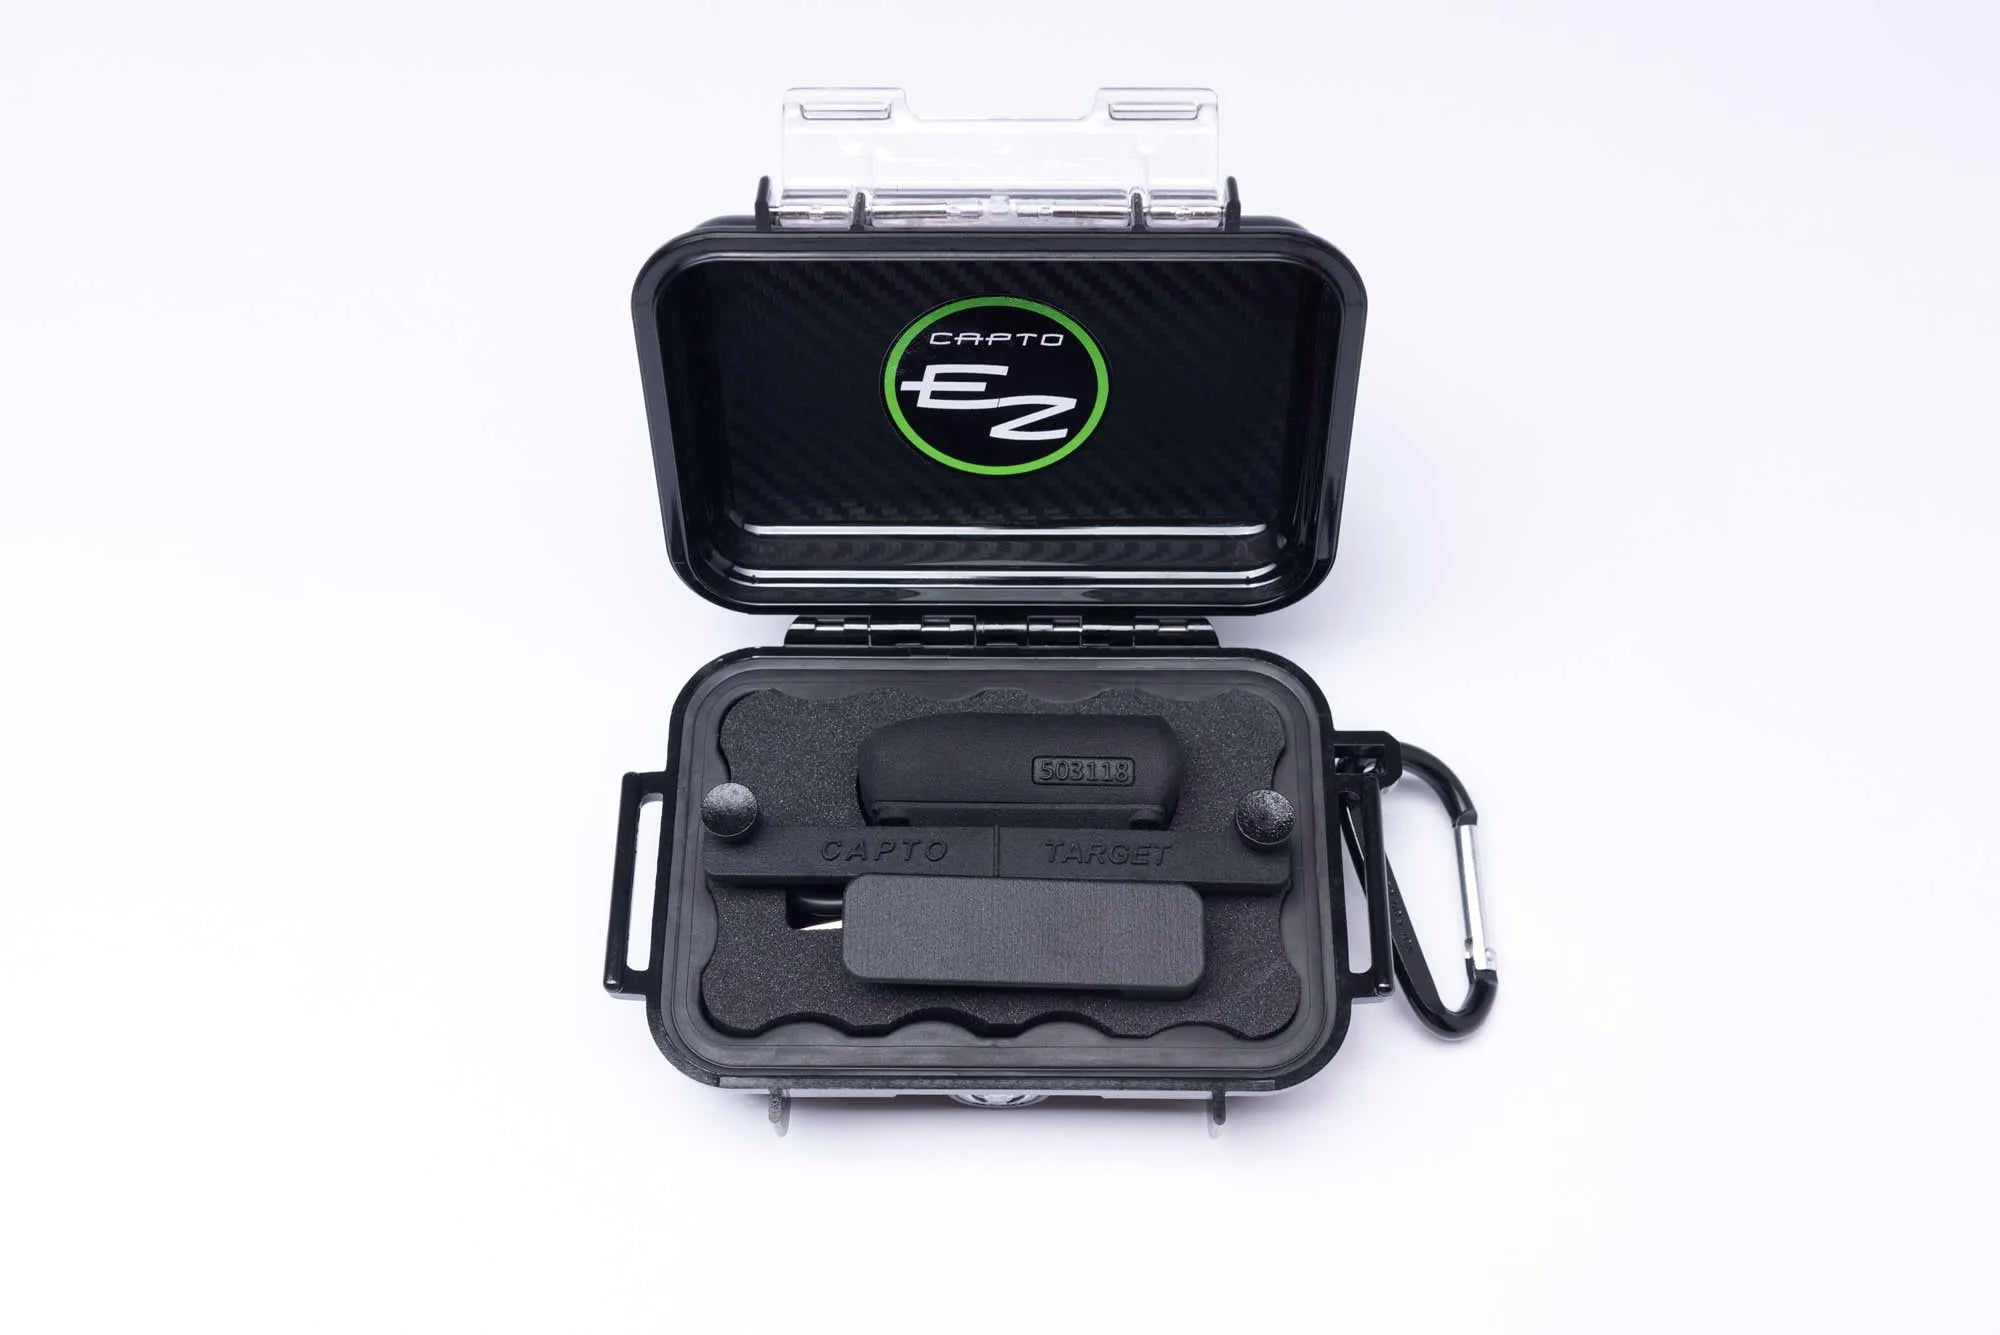 Capto EZ carry case with all the products inside safely protected by foam